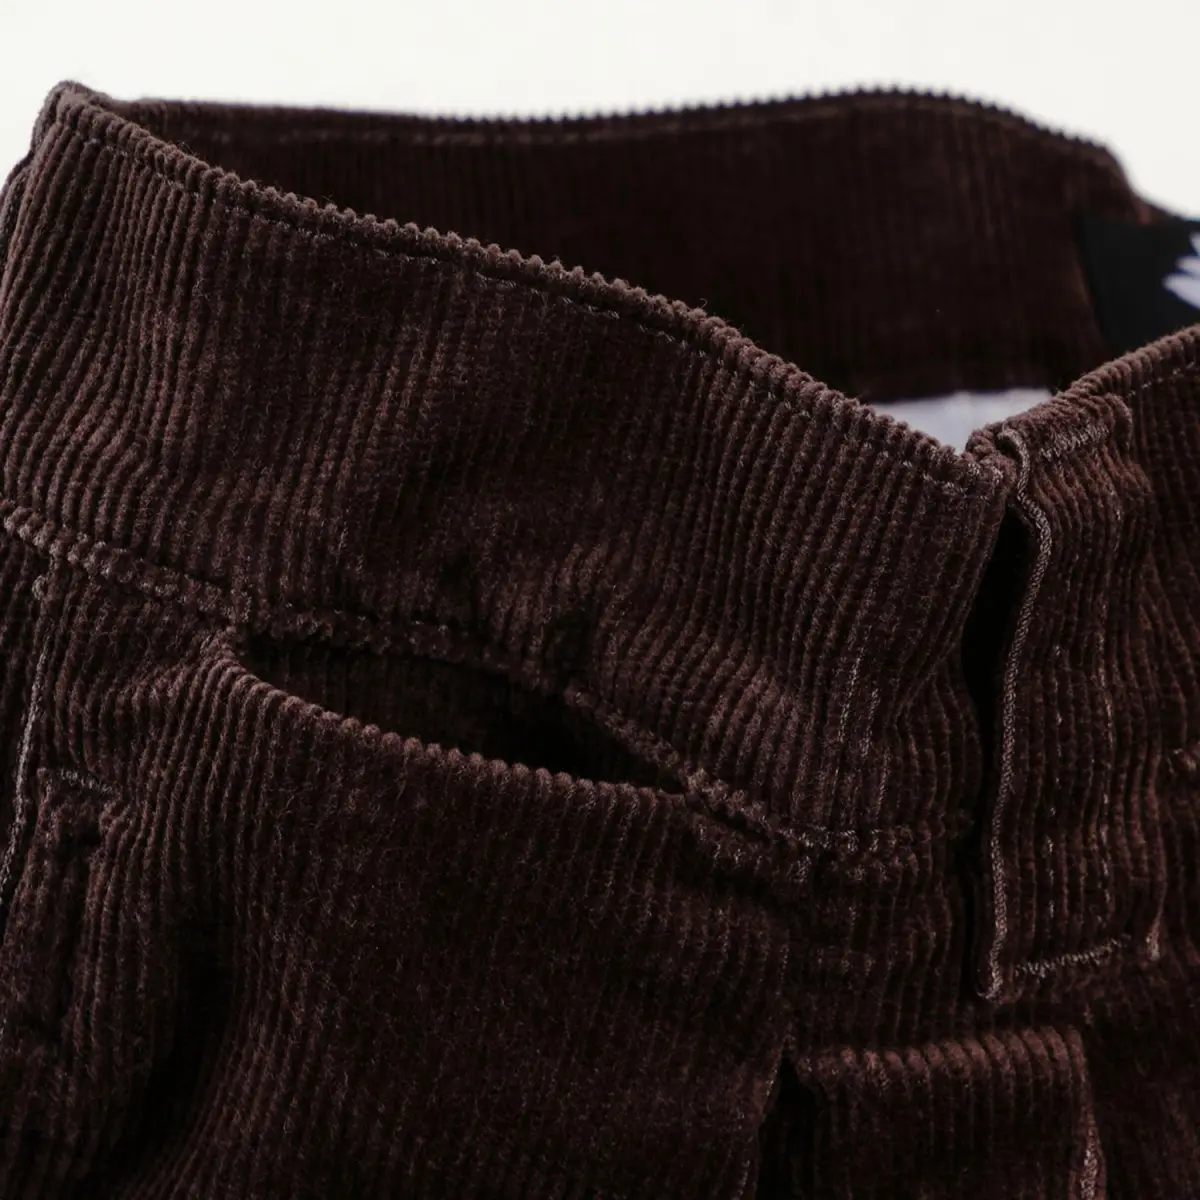 og chino pant choccolate 2_clipped_rev_1